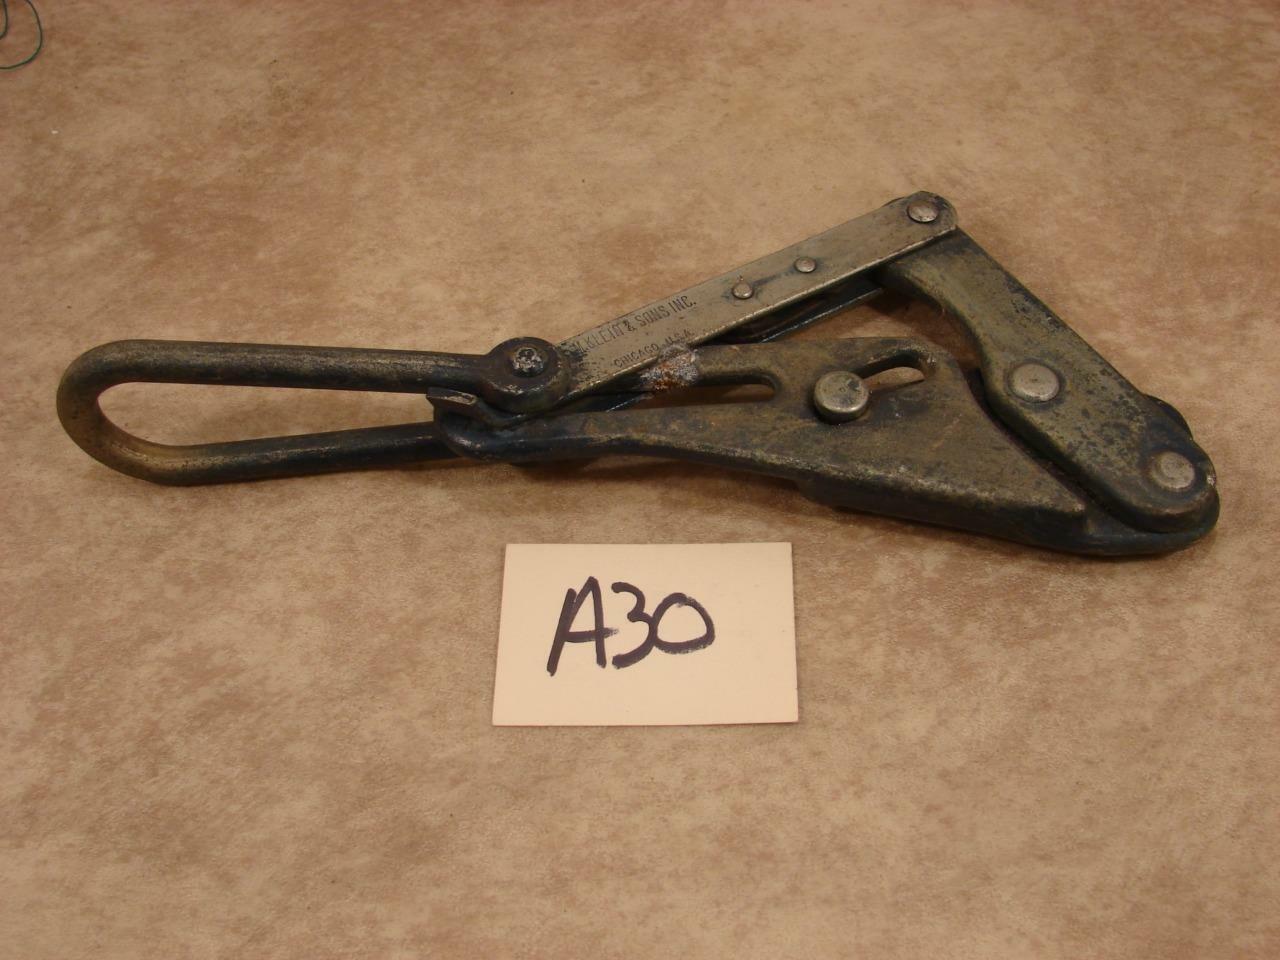 A30 VINTAGE KLEIN TOOLS HEAVY DUTY CABLE WIRE ROPE GRIP PULLER 1613-40B